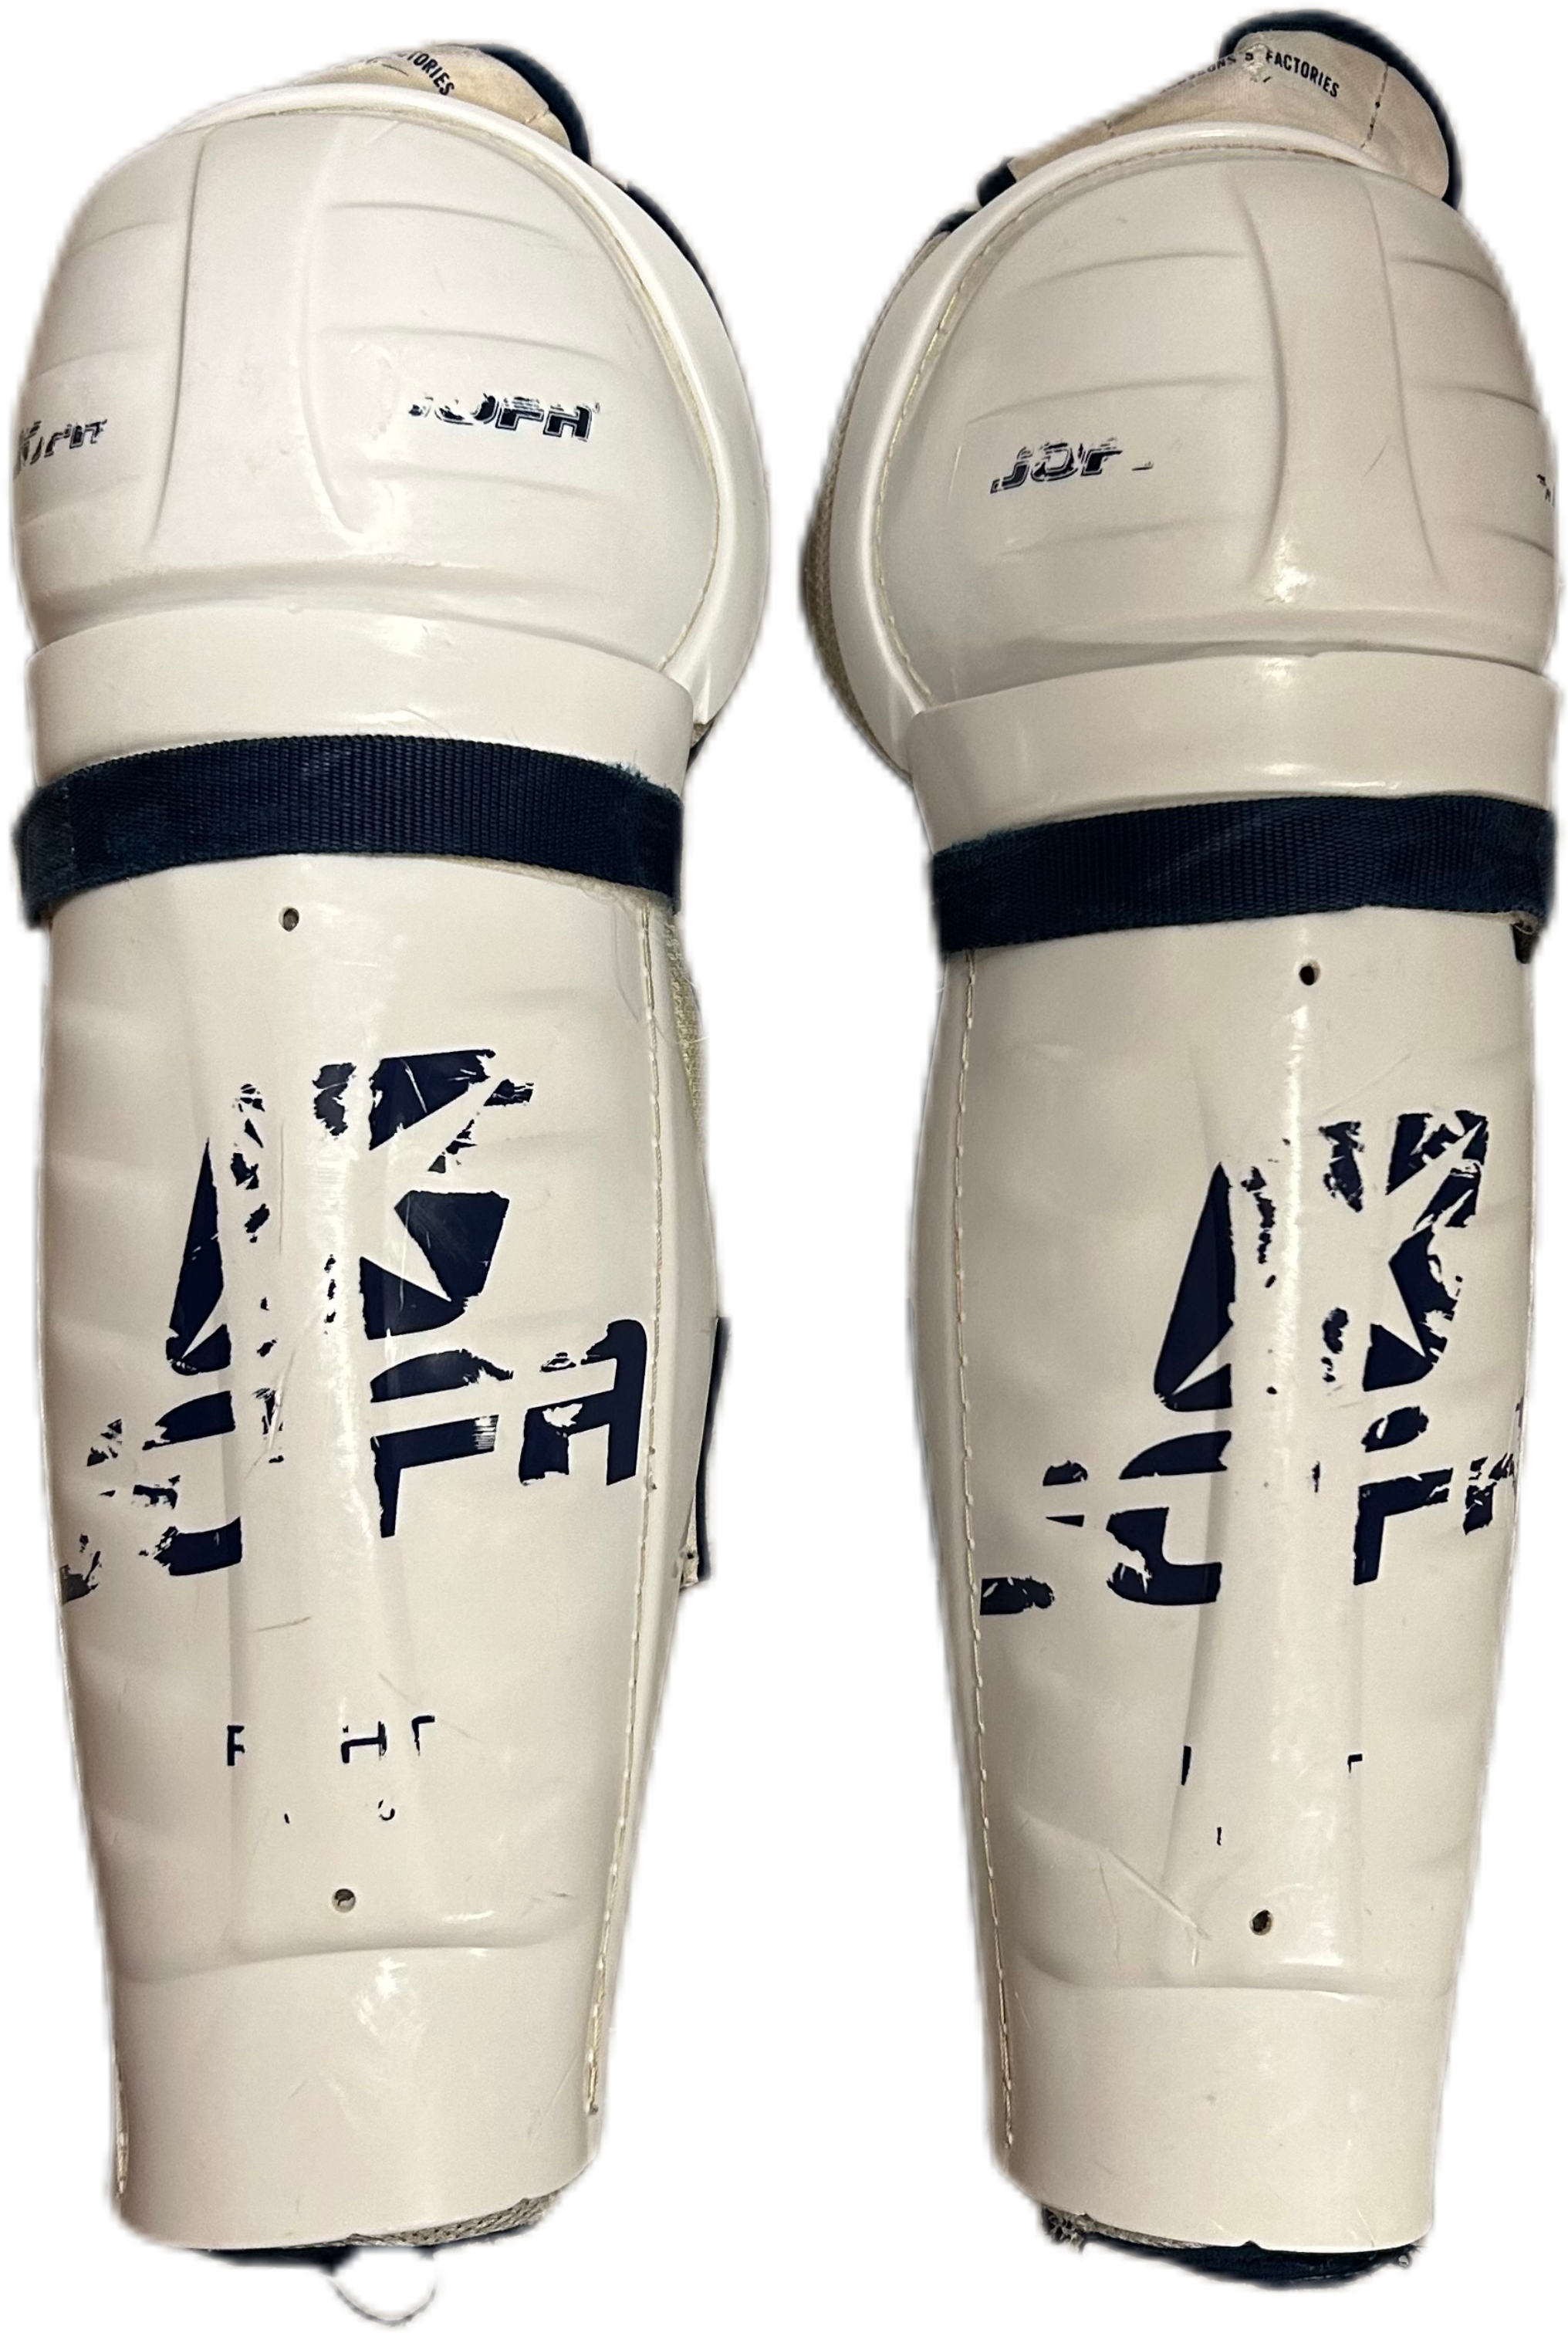 JOFA - Used 16 Pro Stock Shin Pads (Made in Sweden)